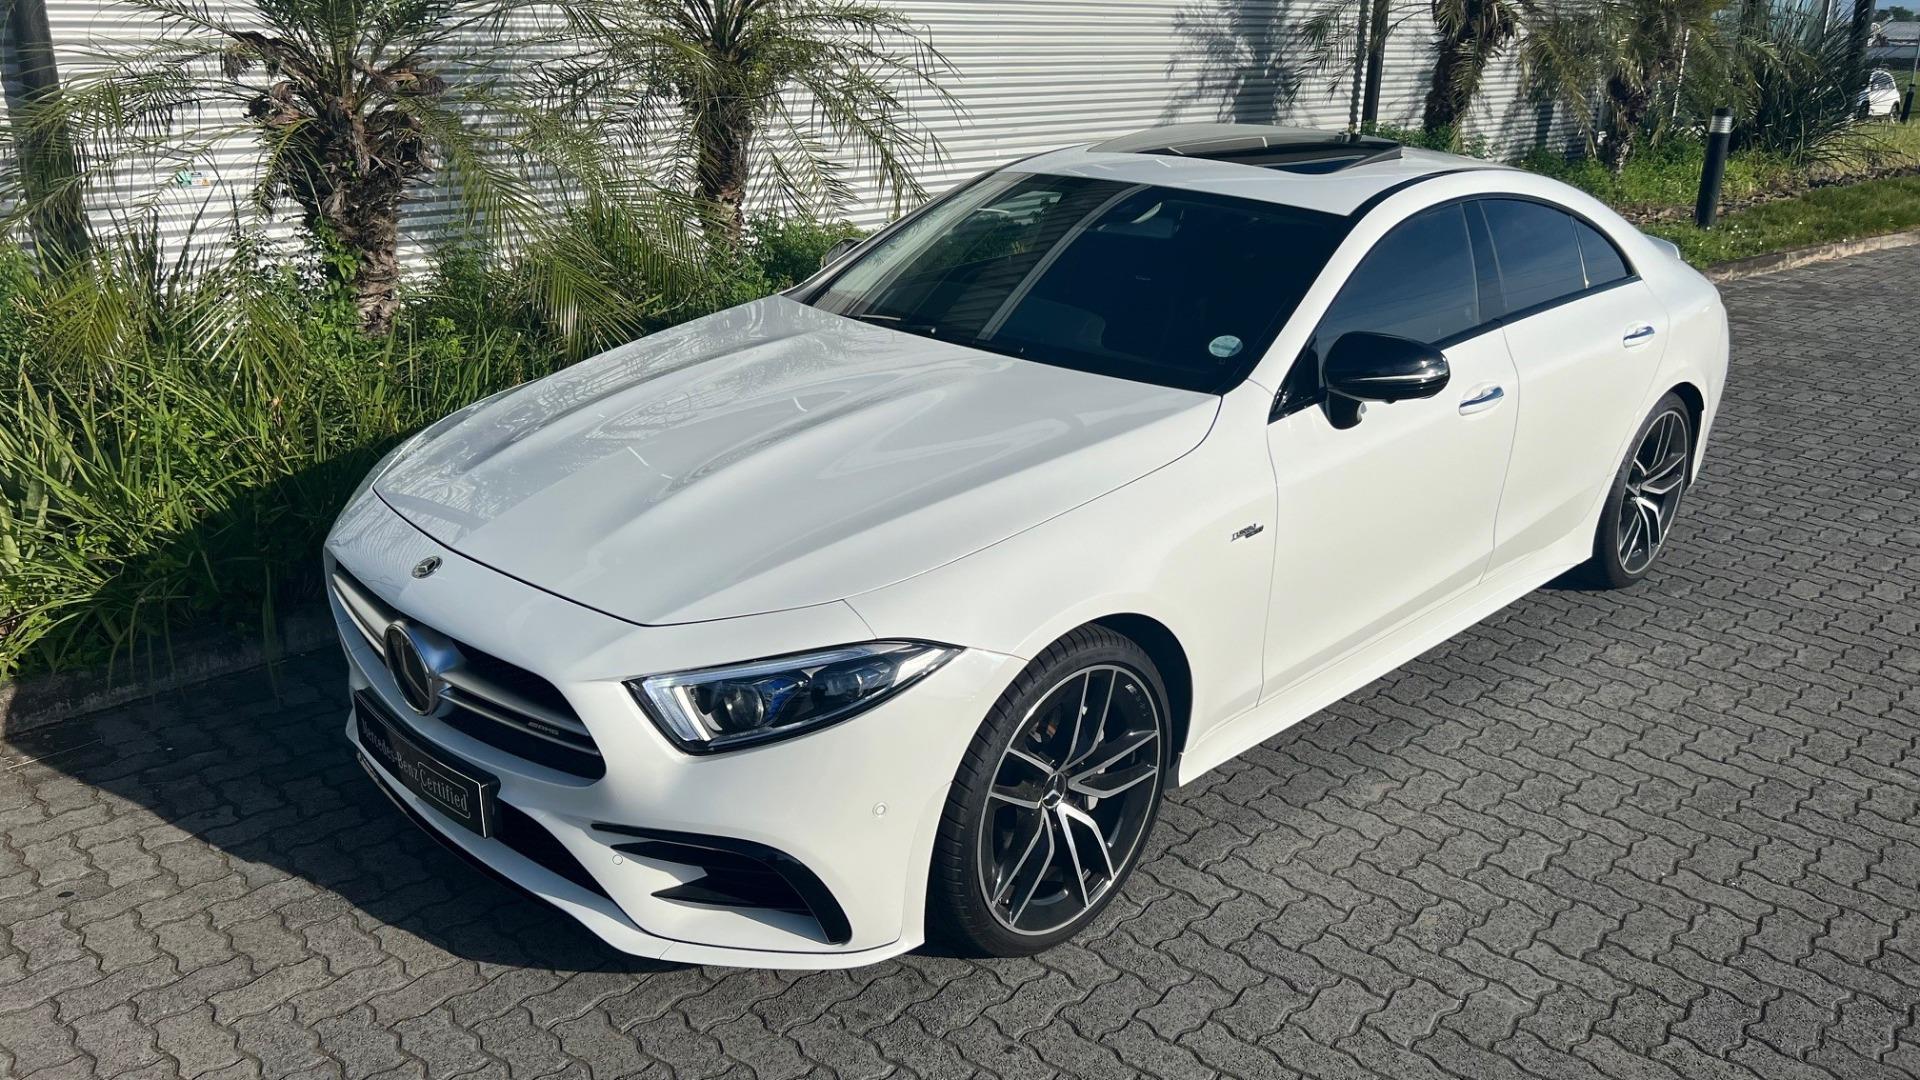 2021 Mercedes-AMG CLS CLS53 4Matic+ For Sale